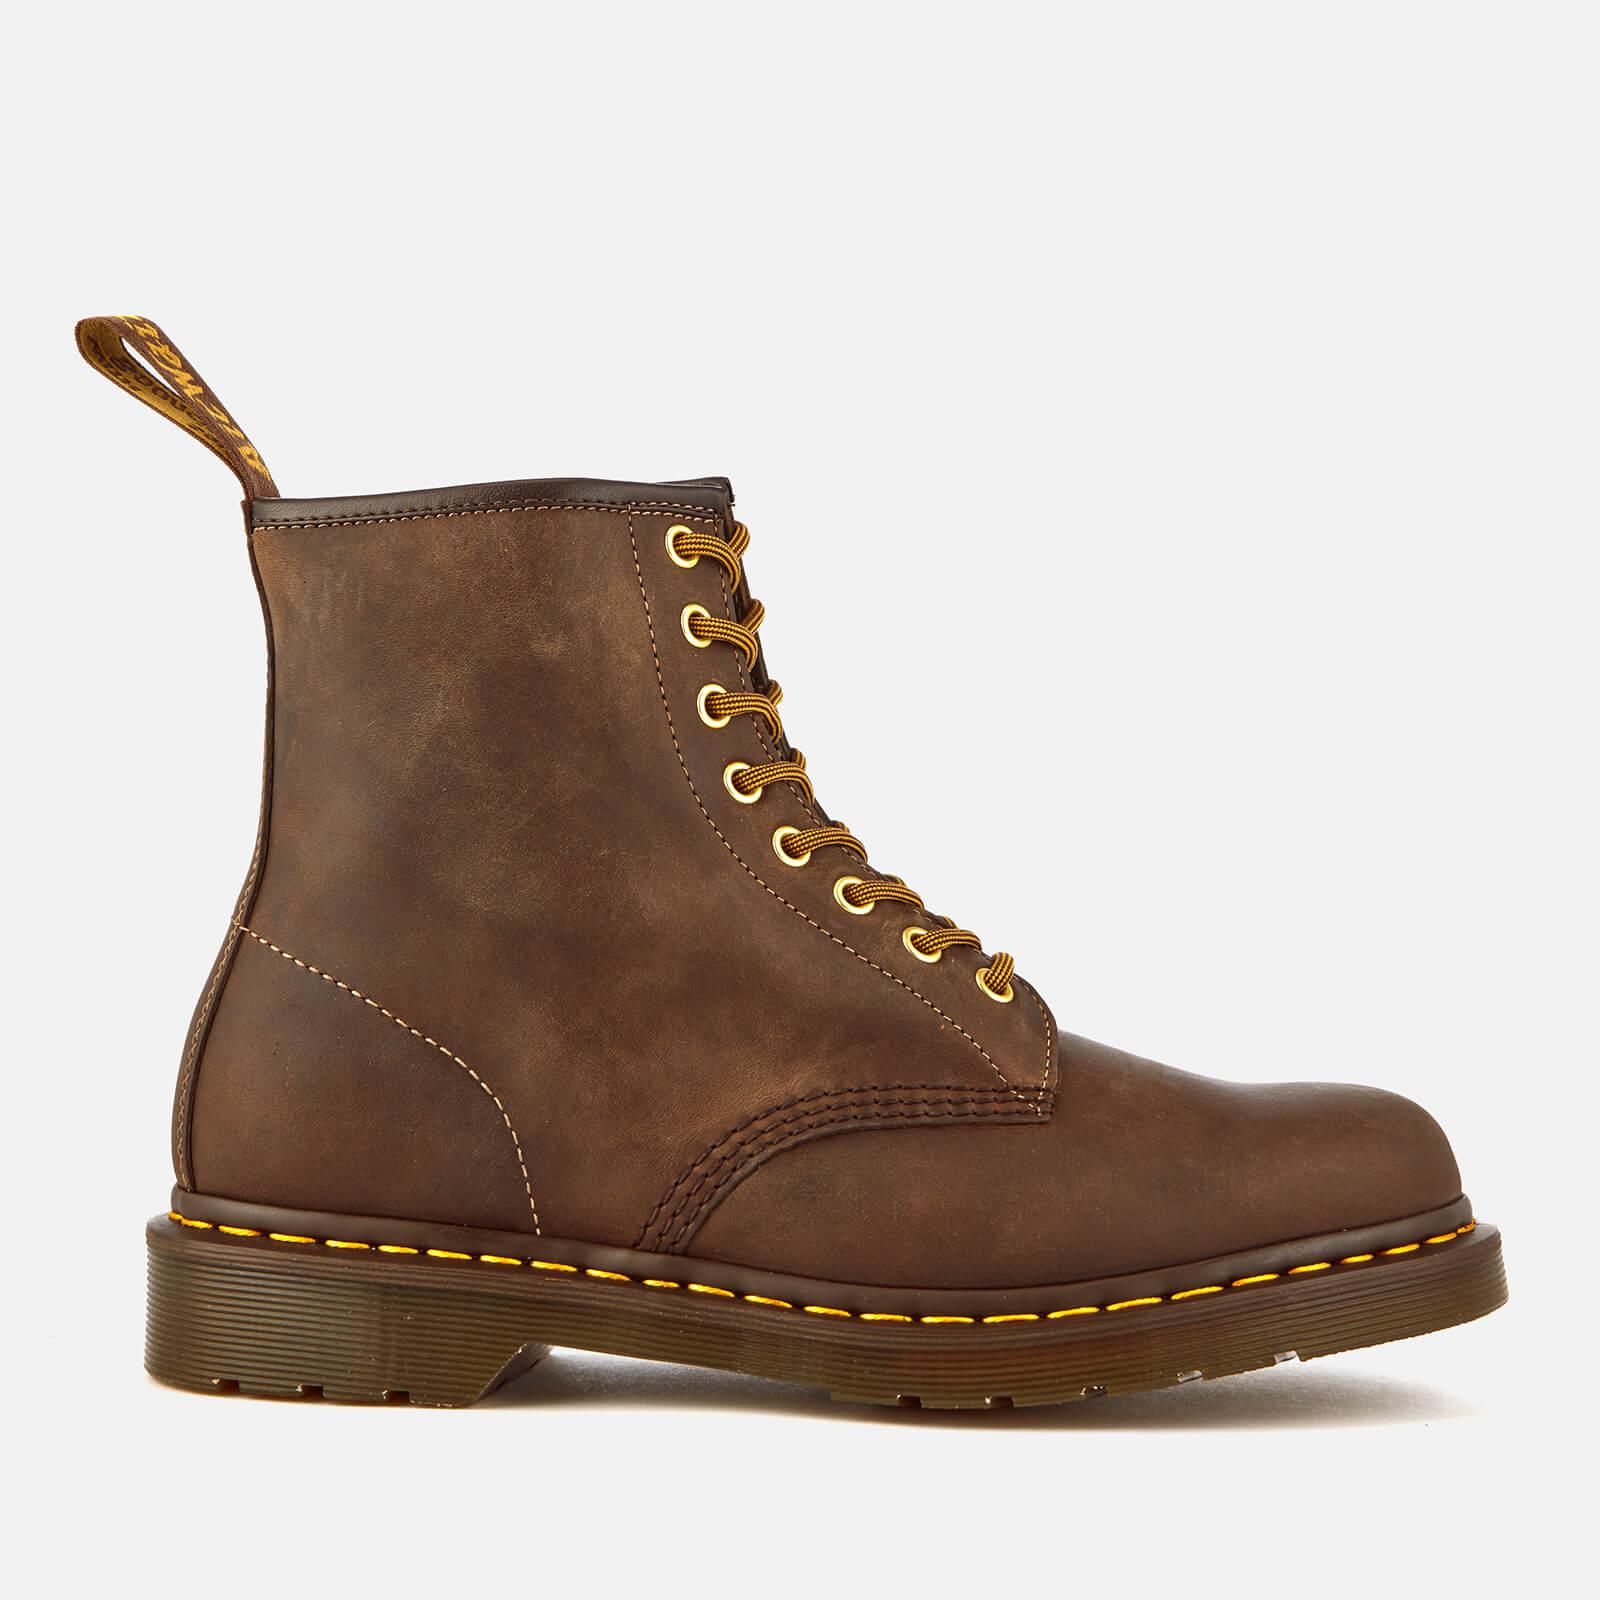 Dr. Martens 1460 Crazy Horse Leather 8-eye Boots in Brown for Men - Lyst